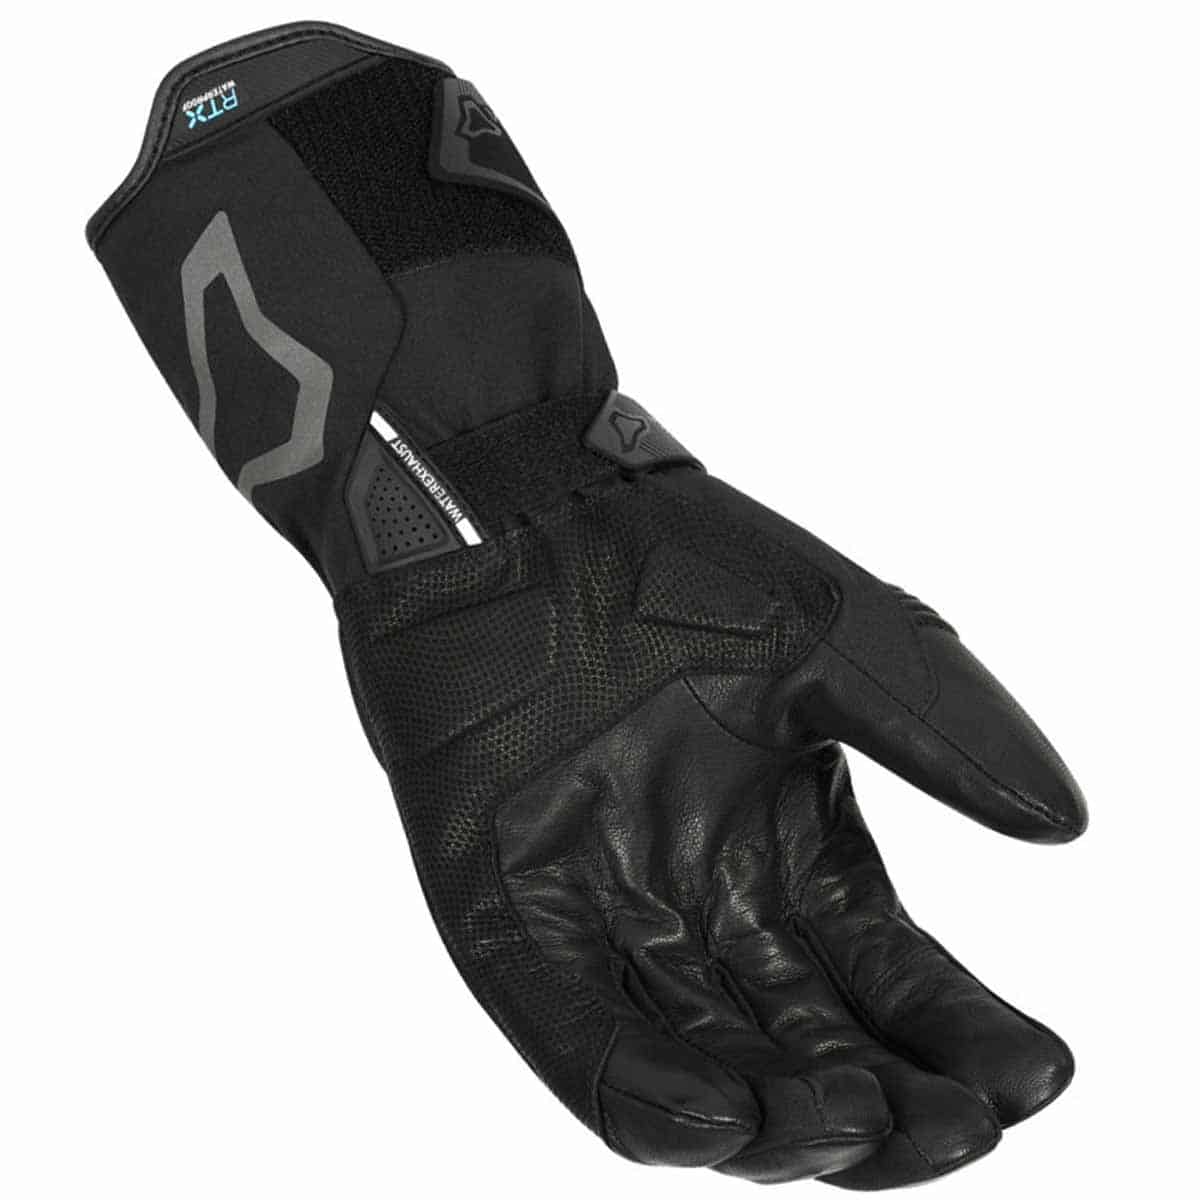 Macna Azra RTX Heated Gloves Kit: A pair of Azra gloves bundled with a 7.4V / 2.2A batteries & charger pack - palm